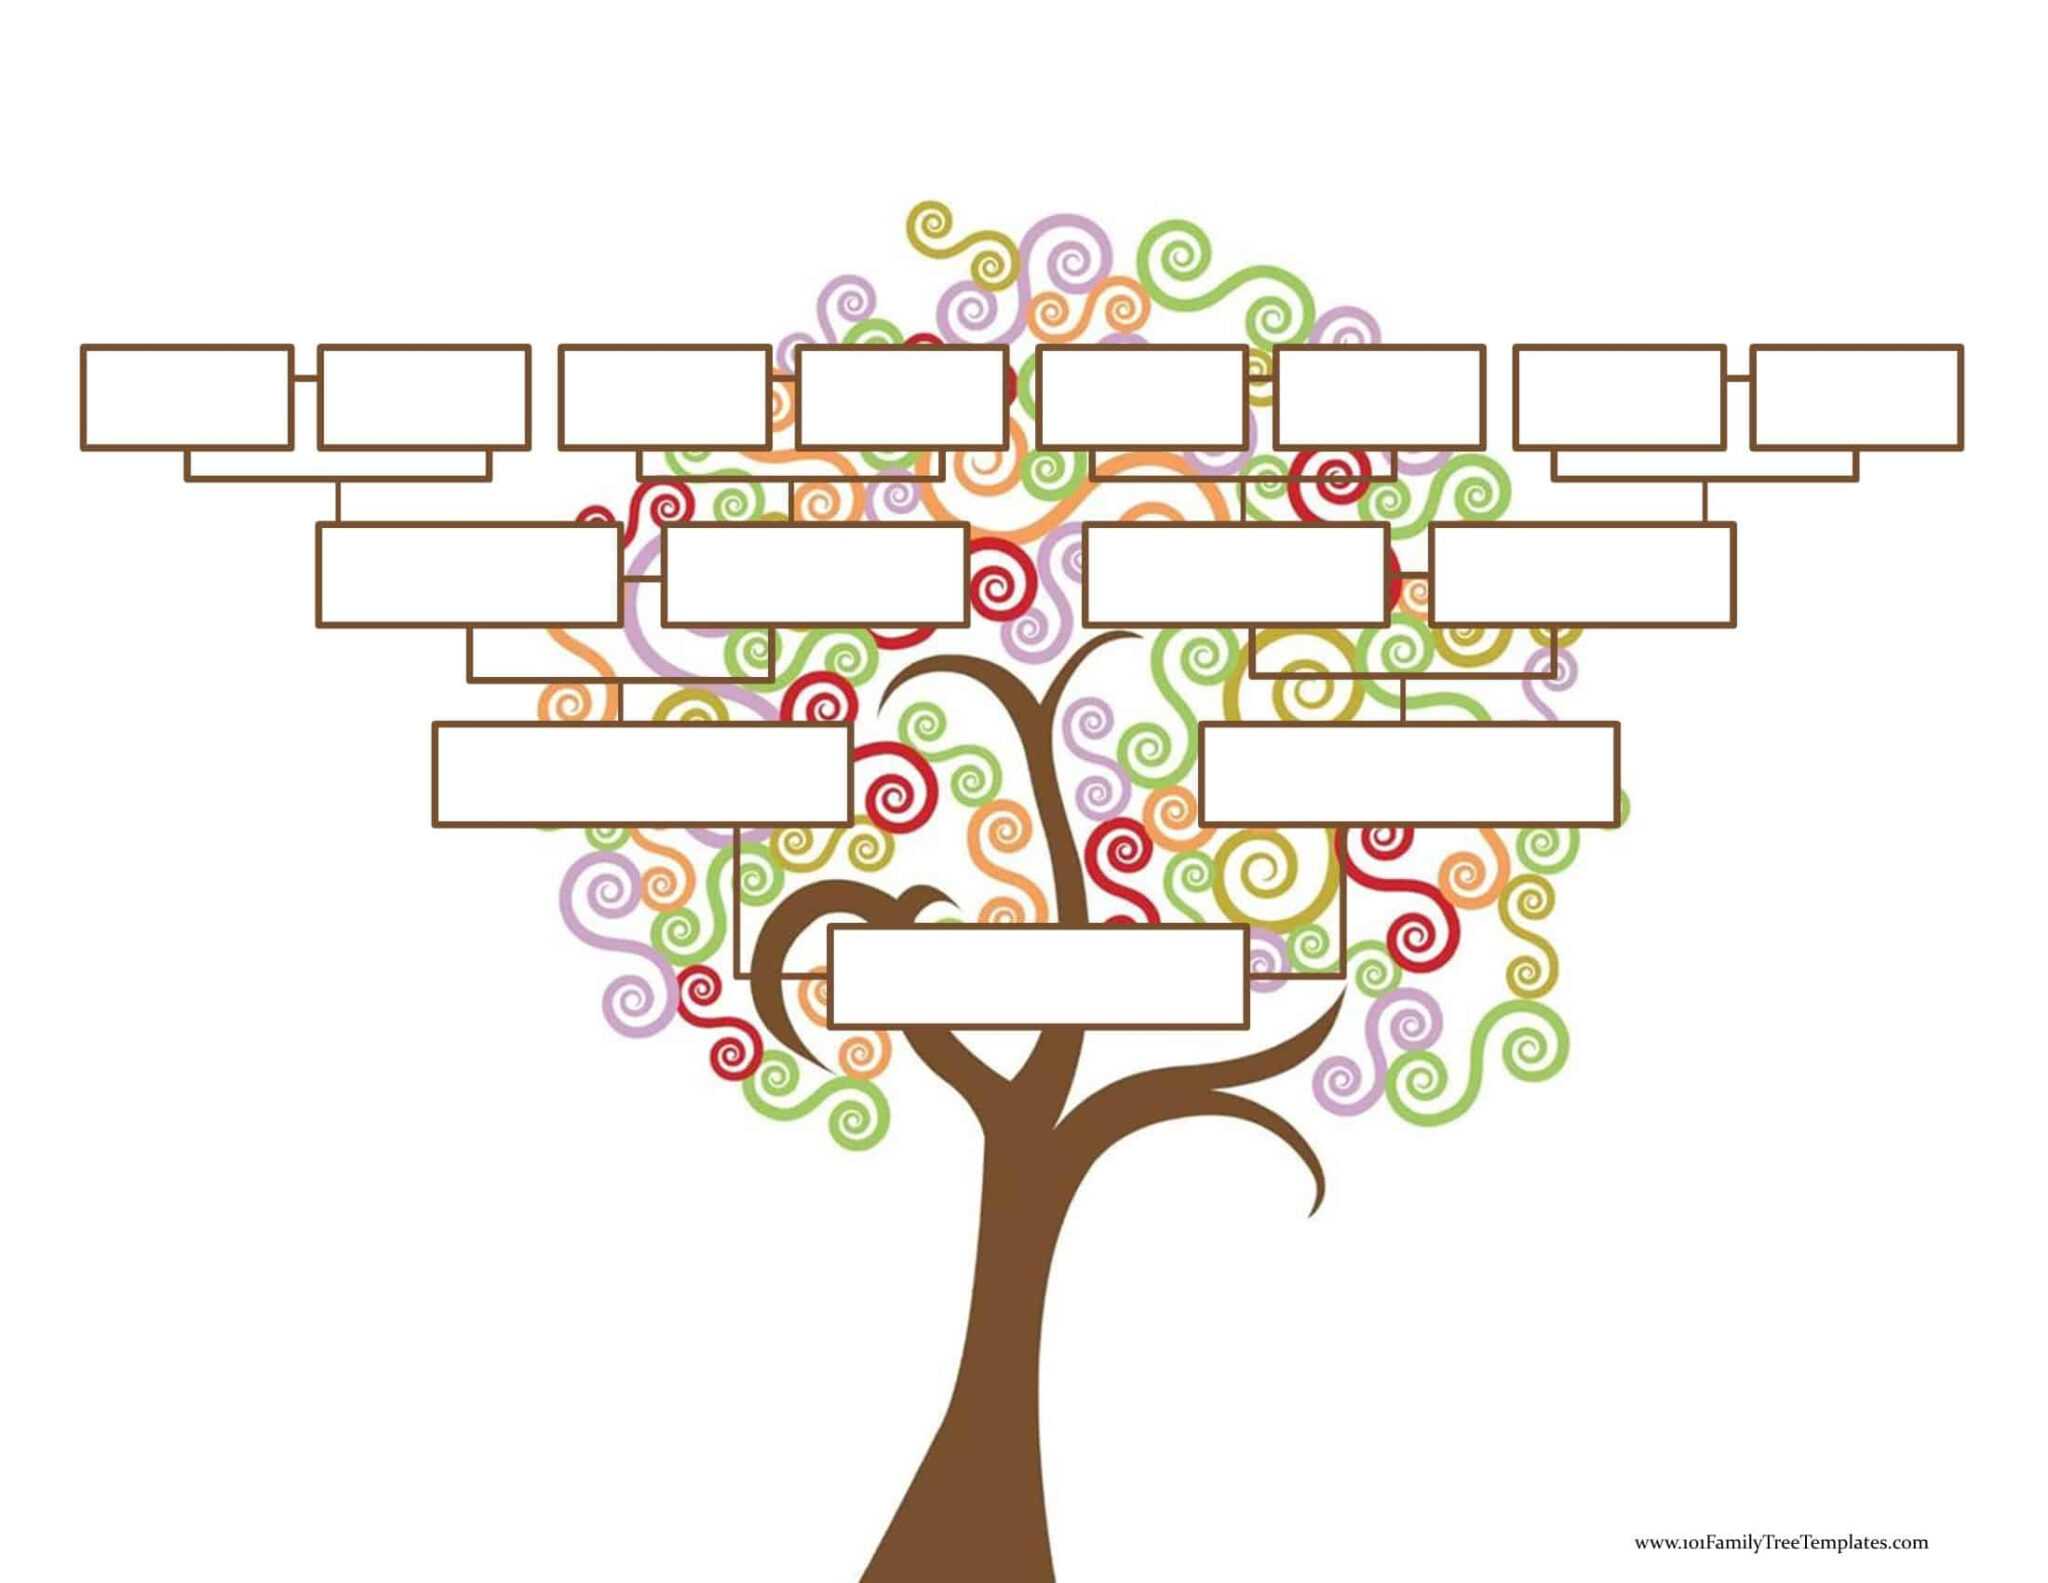 fill-in-the-blank-family-tree-template-best-professional-template